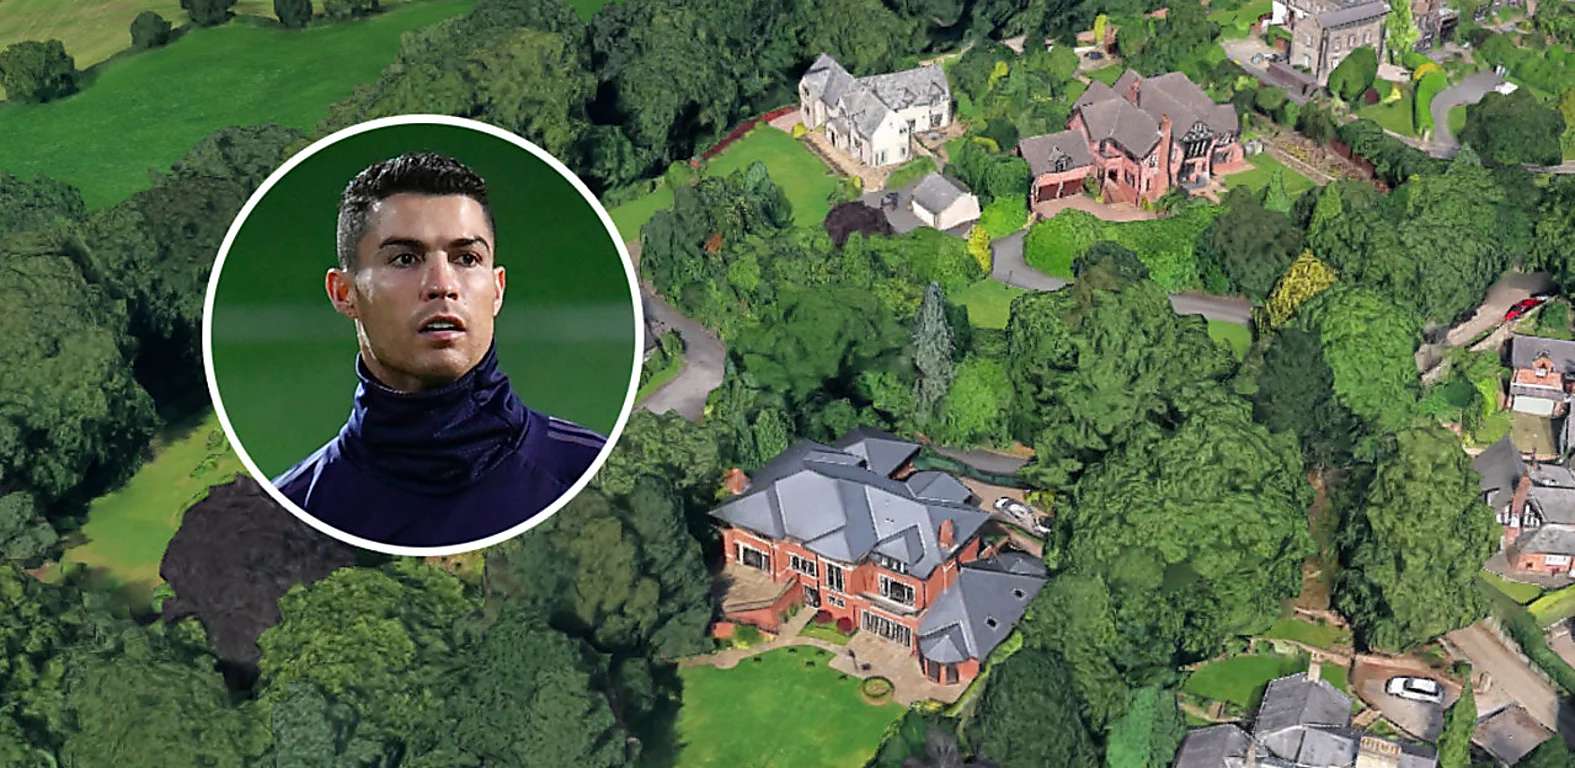 Outbrain Ad Example 55998 - Cristiano Ronaldo Selling Former Manchester Mansion For £3.25M